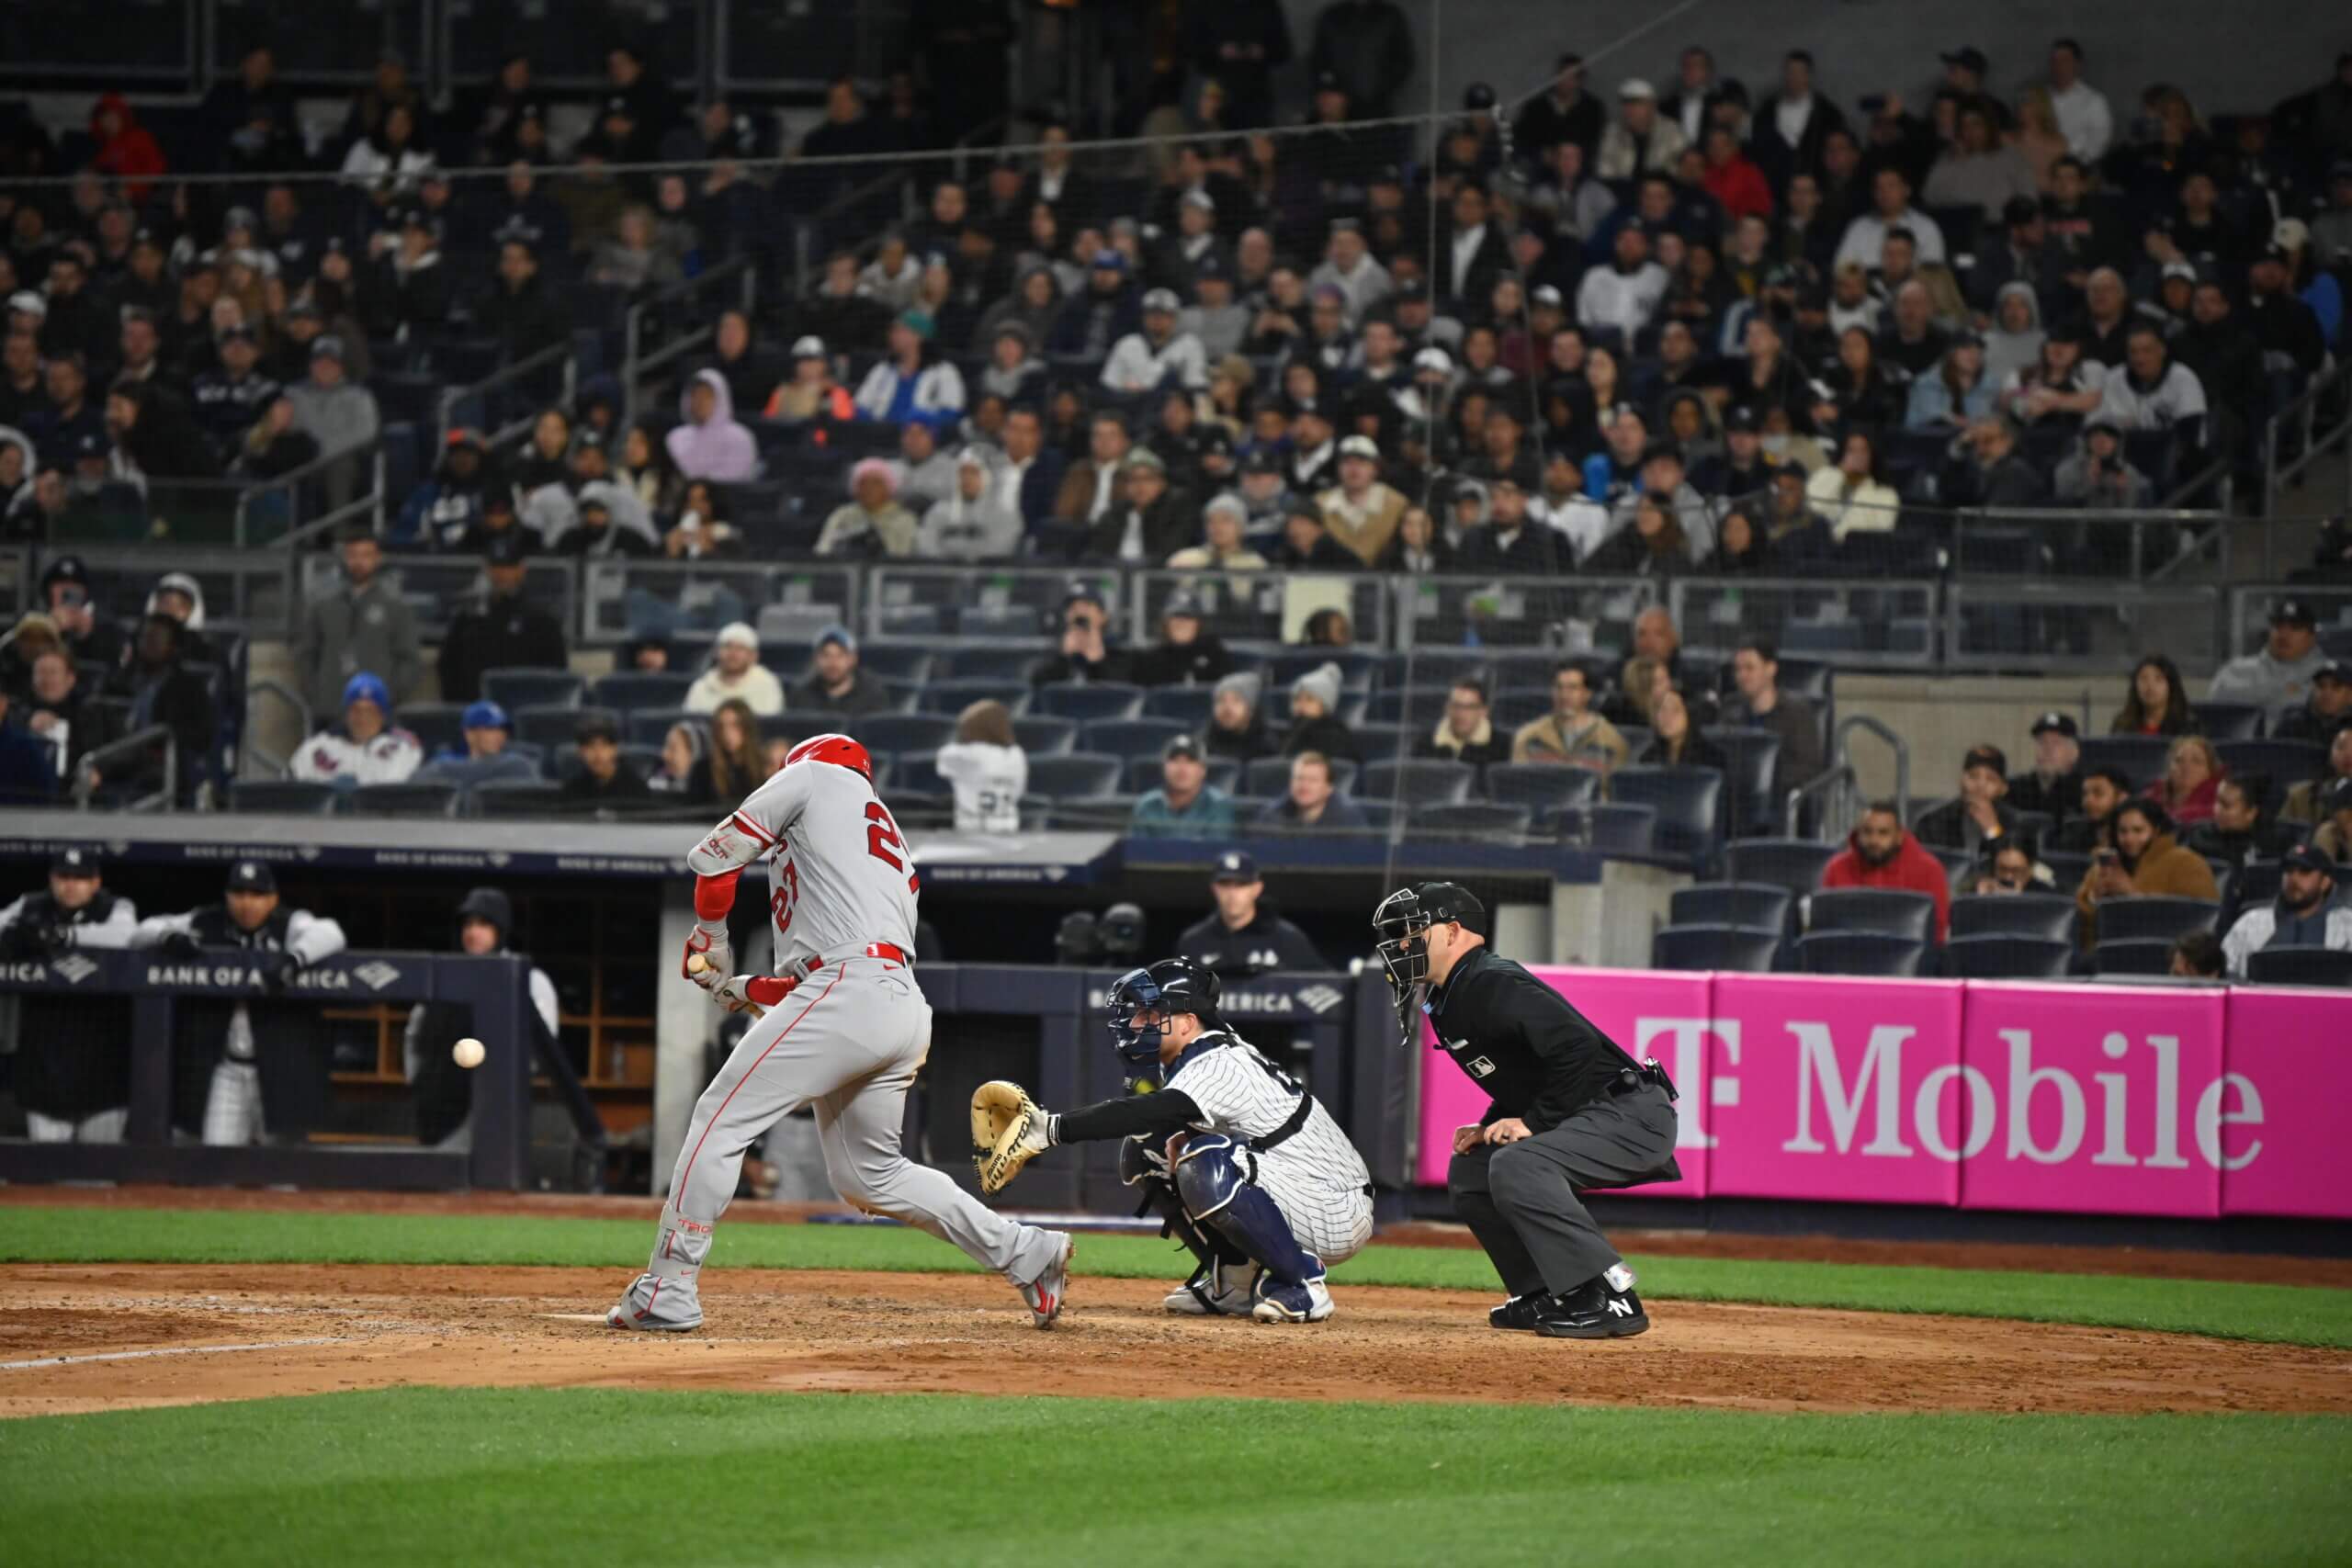 Los Angeles Angels outfielder Mike Trout at the plate during a game between the Yankees and Angels at Yankee Stadium on April 18, 2023.